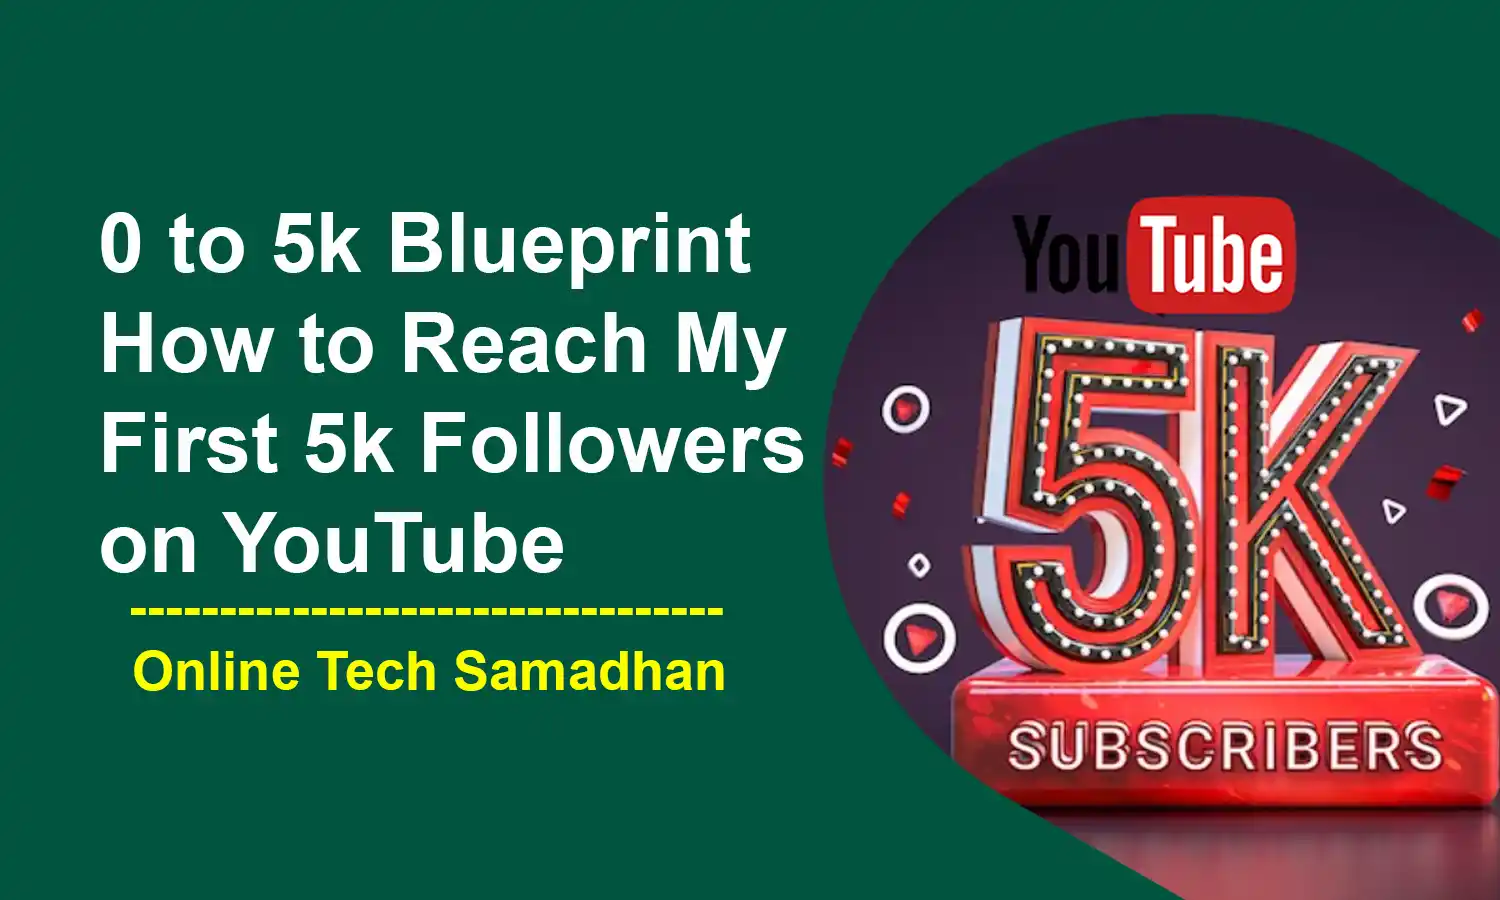 How to Reach My First 5k Followers on YouTube